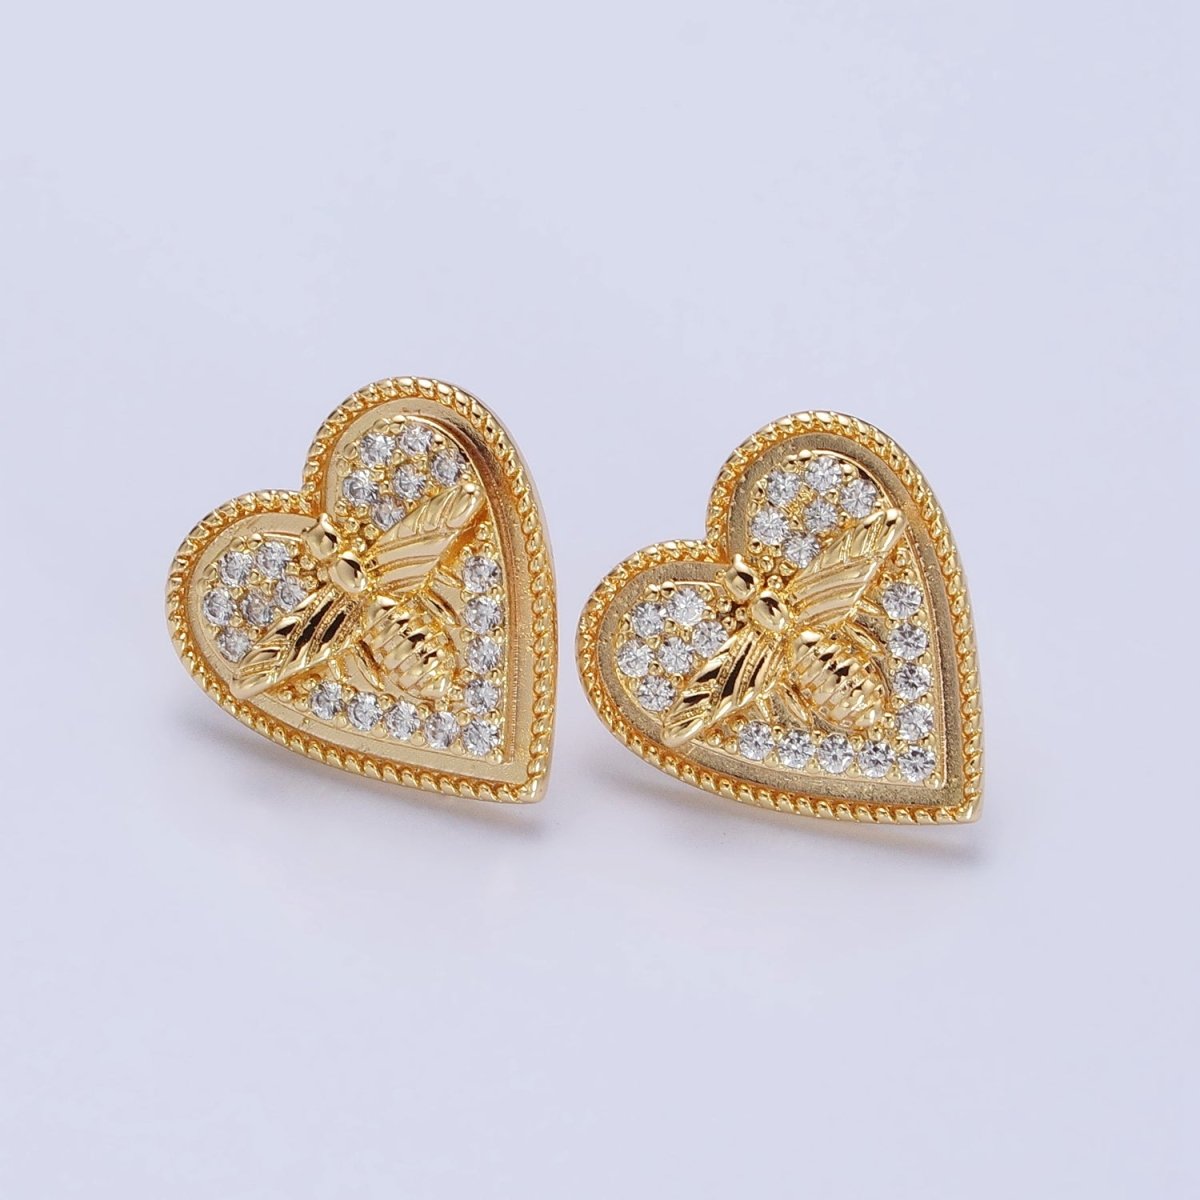 Gold, Silver Bumble Queen Bee Micro Paved CZ Heart Stud Earrings | AB459 AB489 - DLUXCA